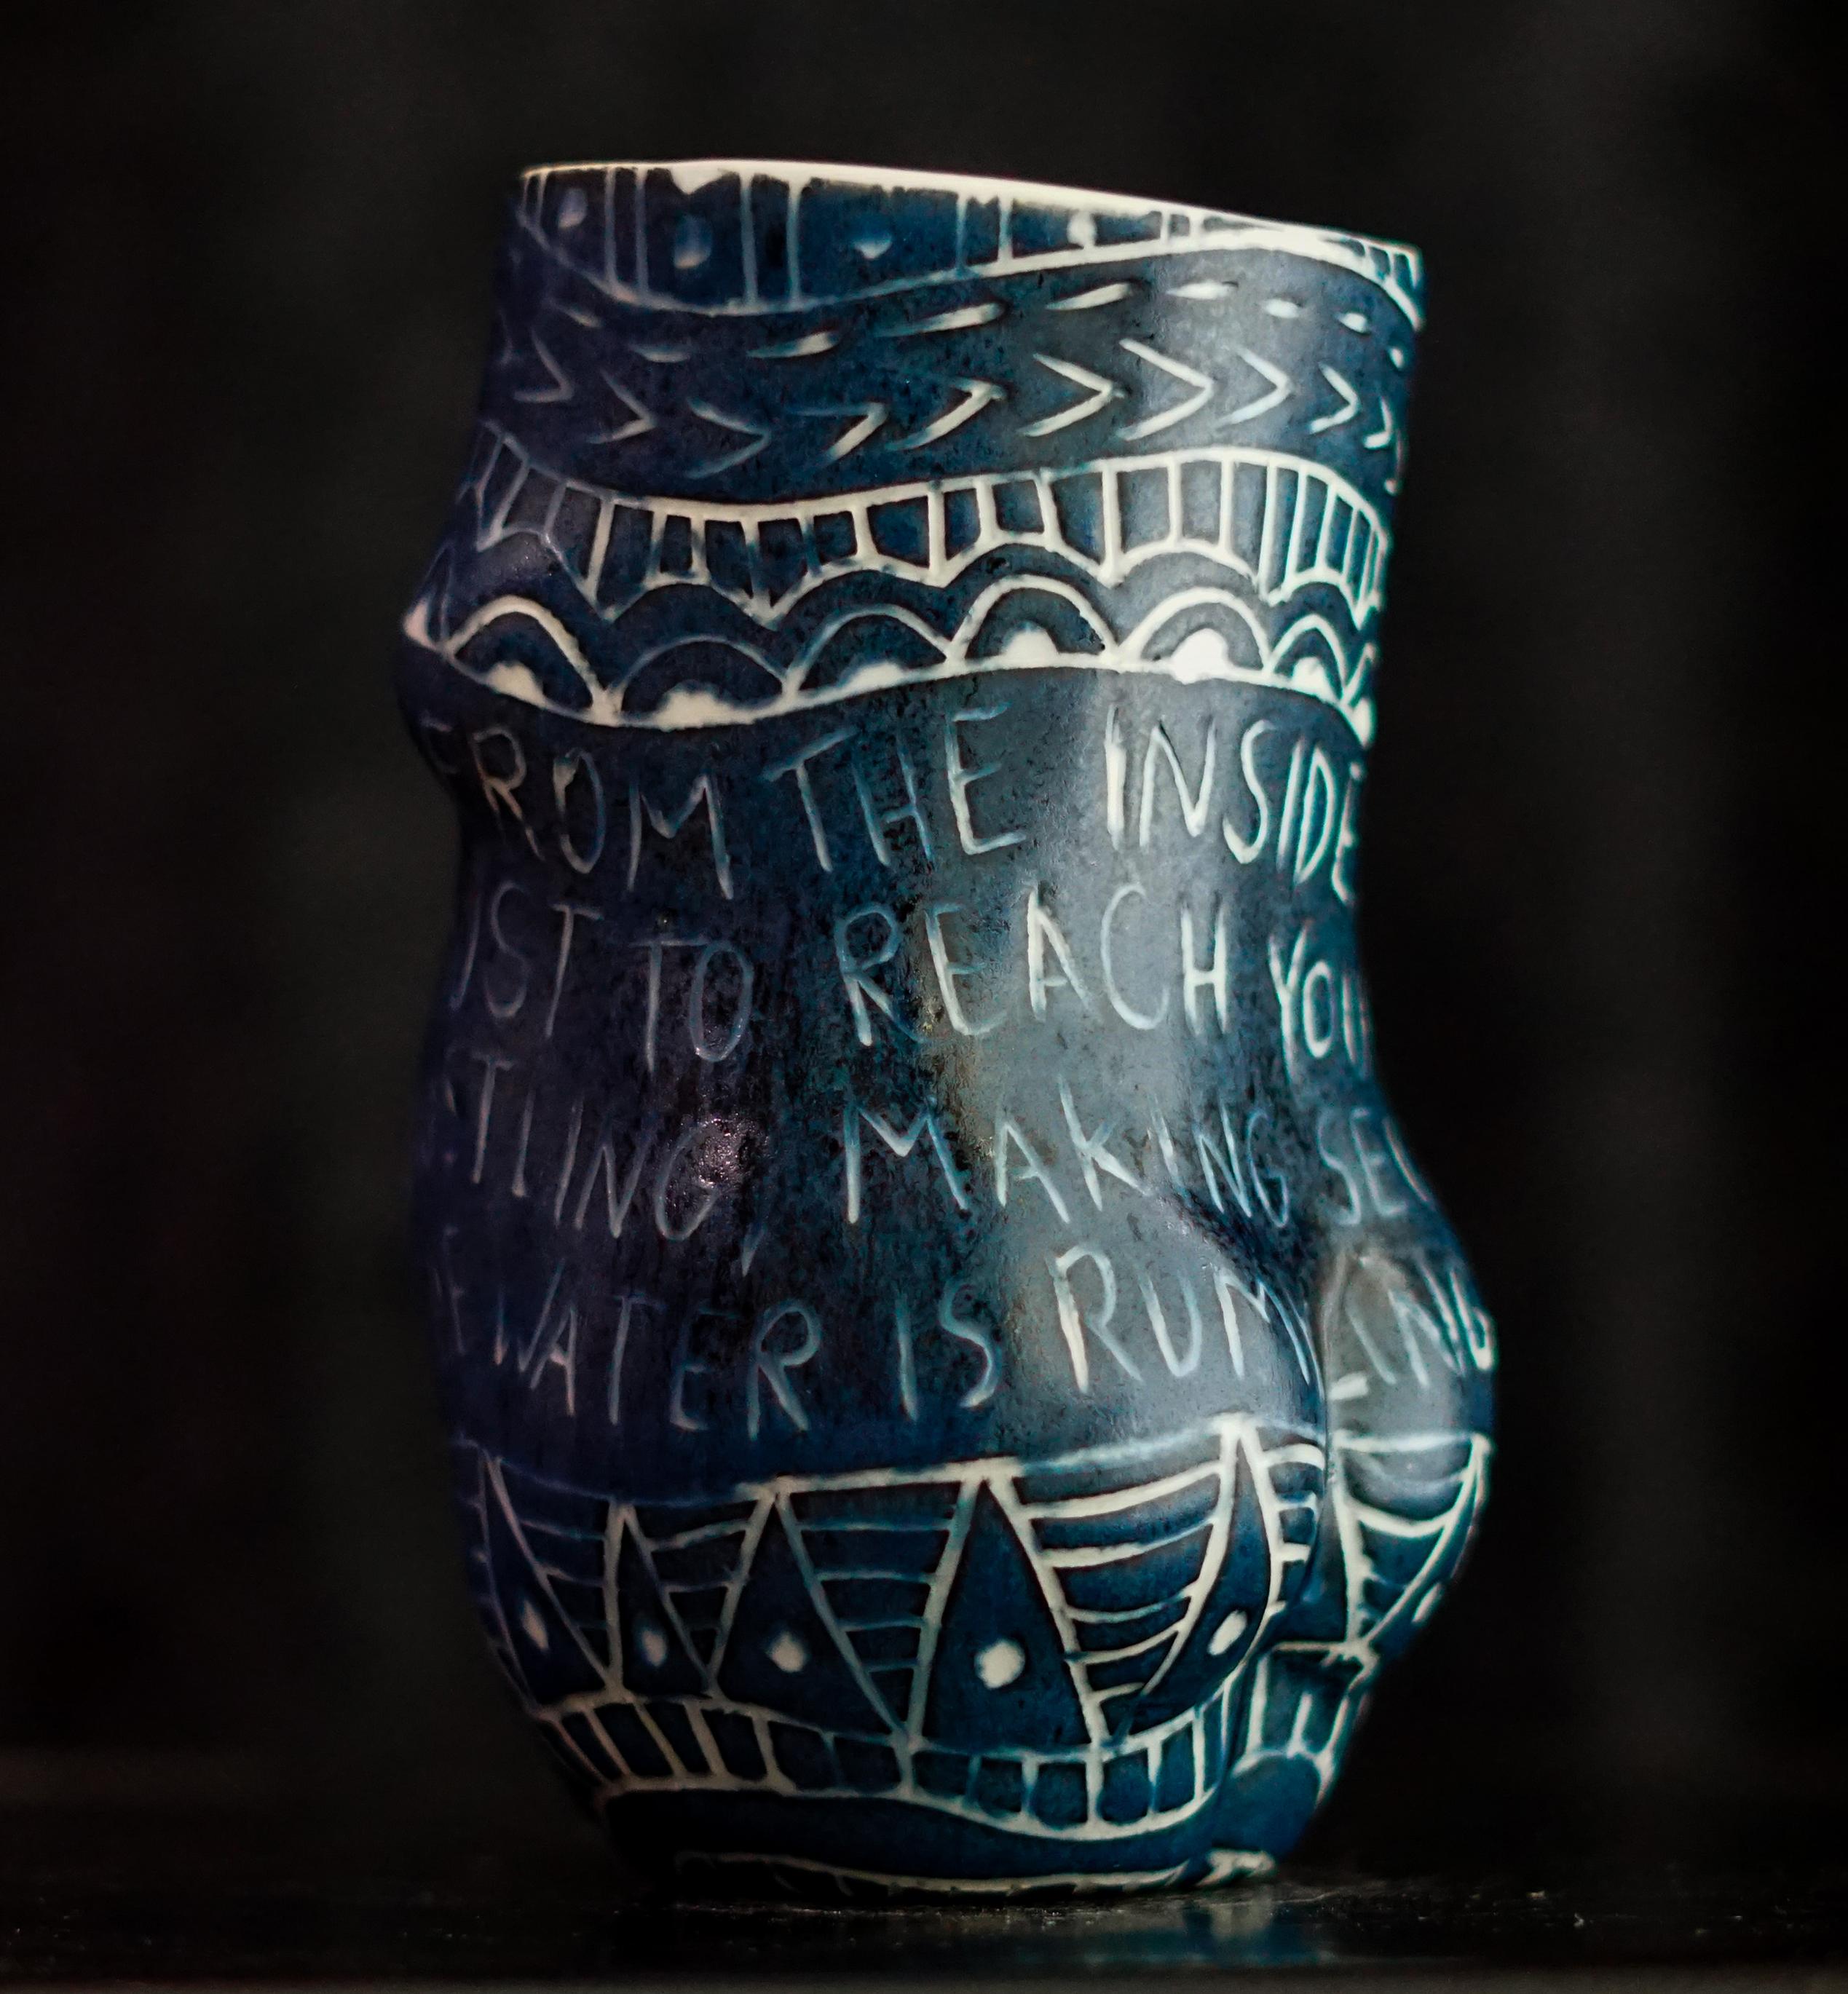 “...Is Beating Me From the Inside...” Porcelain cup with sgraffito detailing - Modern Sculpture by Alex Hodge